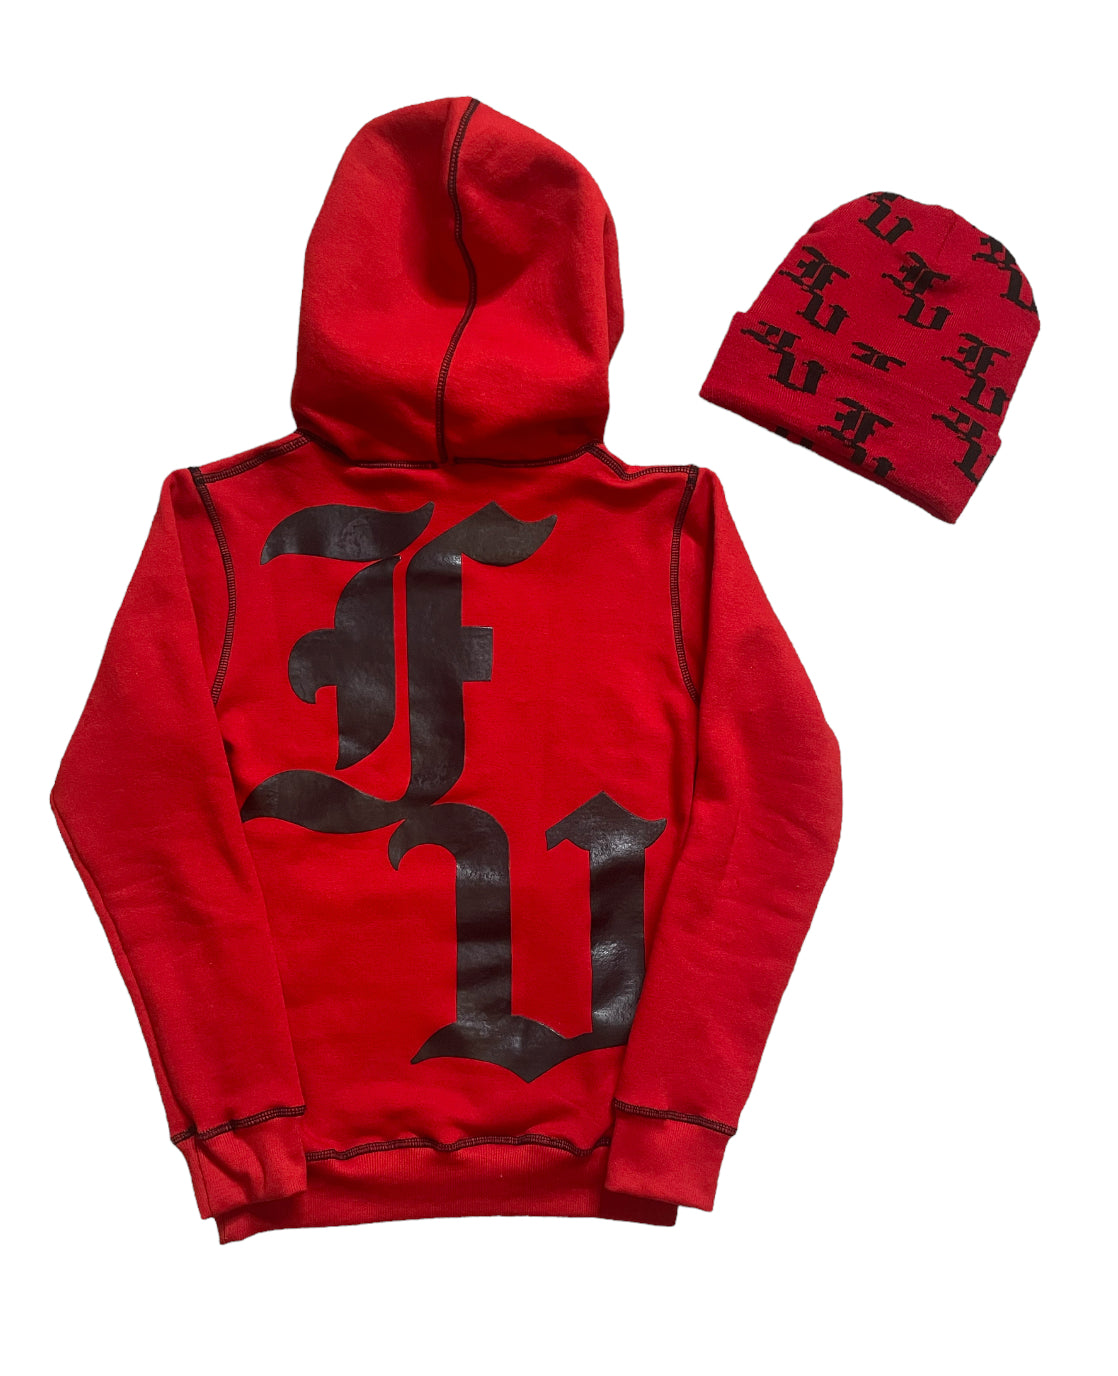 FV Red Stitched Pullover